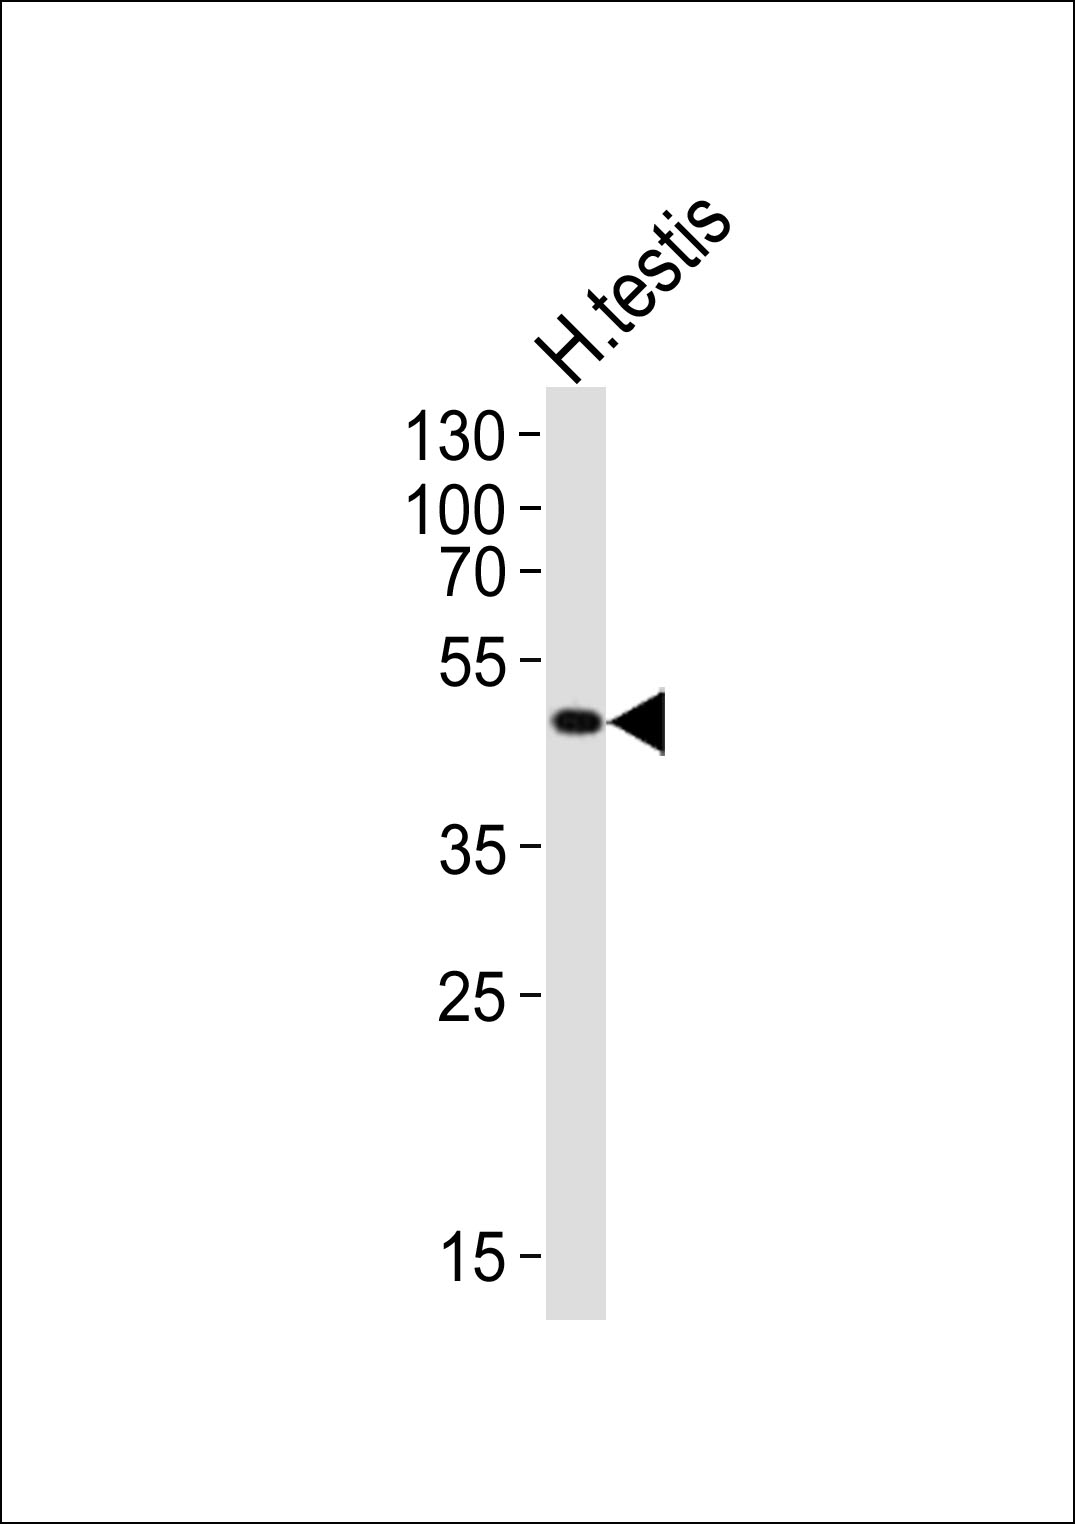 Western blot analysis of lysate from human testis tissue lysate,  using LIPI Antibody (Center)(Cat.  #AP21120a). AP21120a was diluted at 1:1000.  A goat anti-rabbit IgG H&L(HRP) at 1:10000 dilution was used as the secondary antibody. Lysate at 20ug.